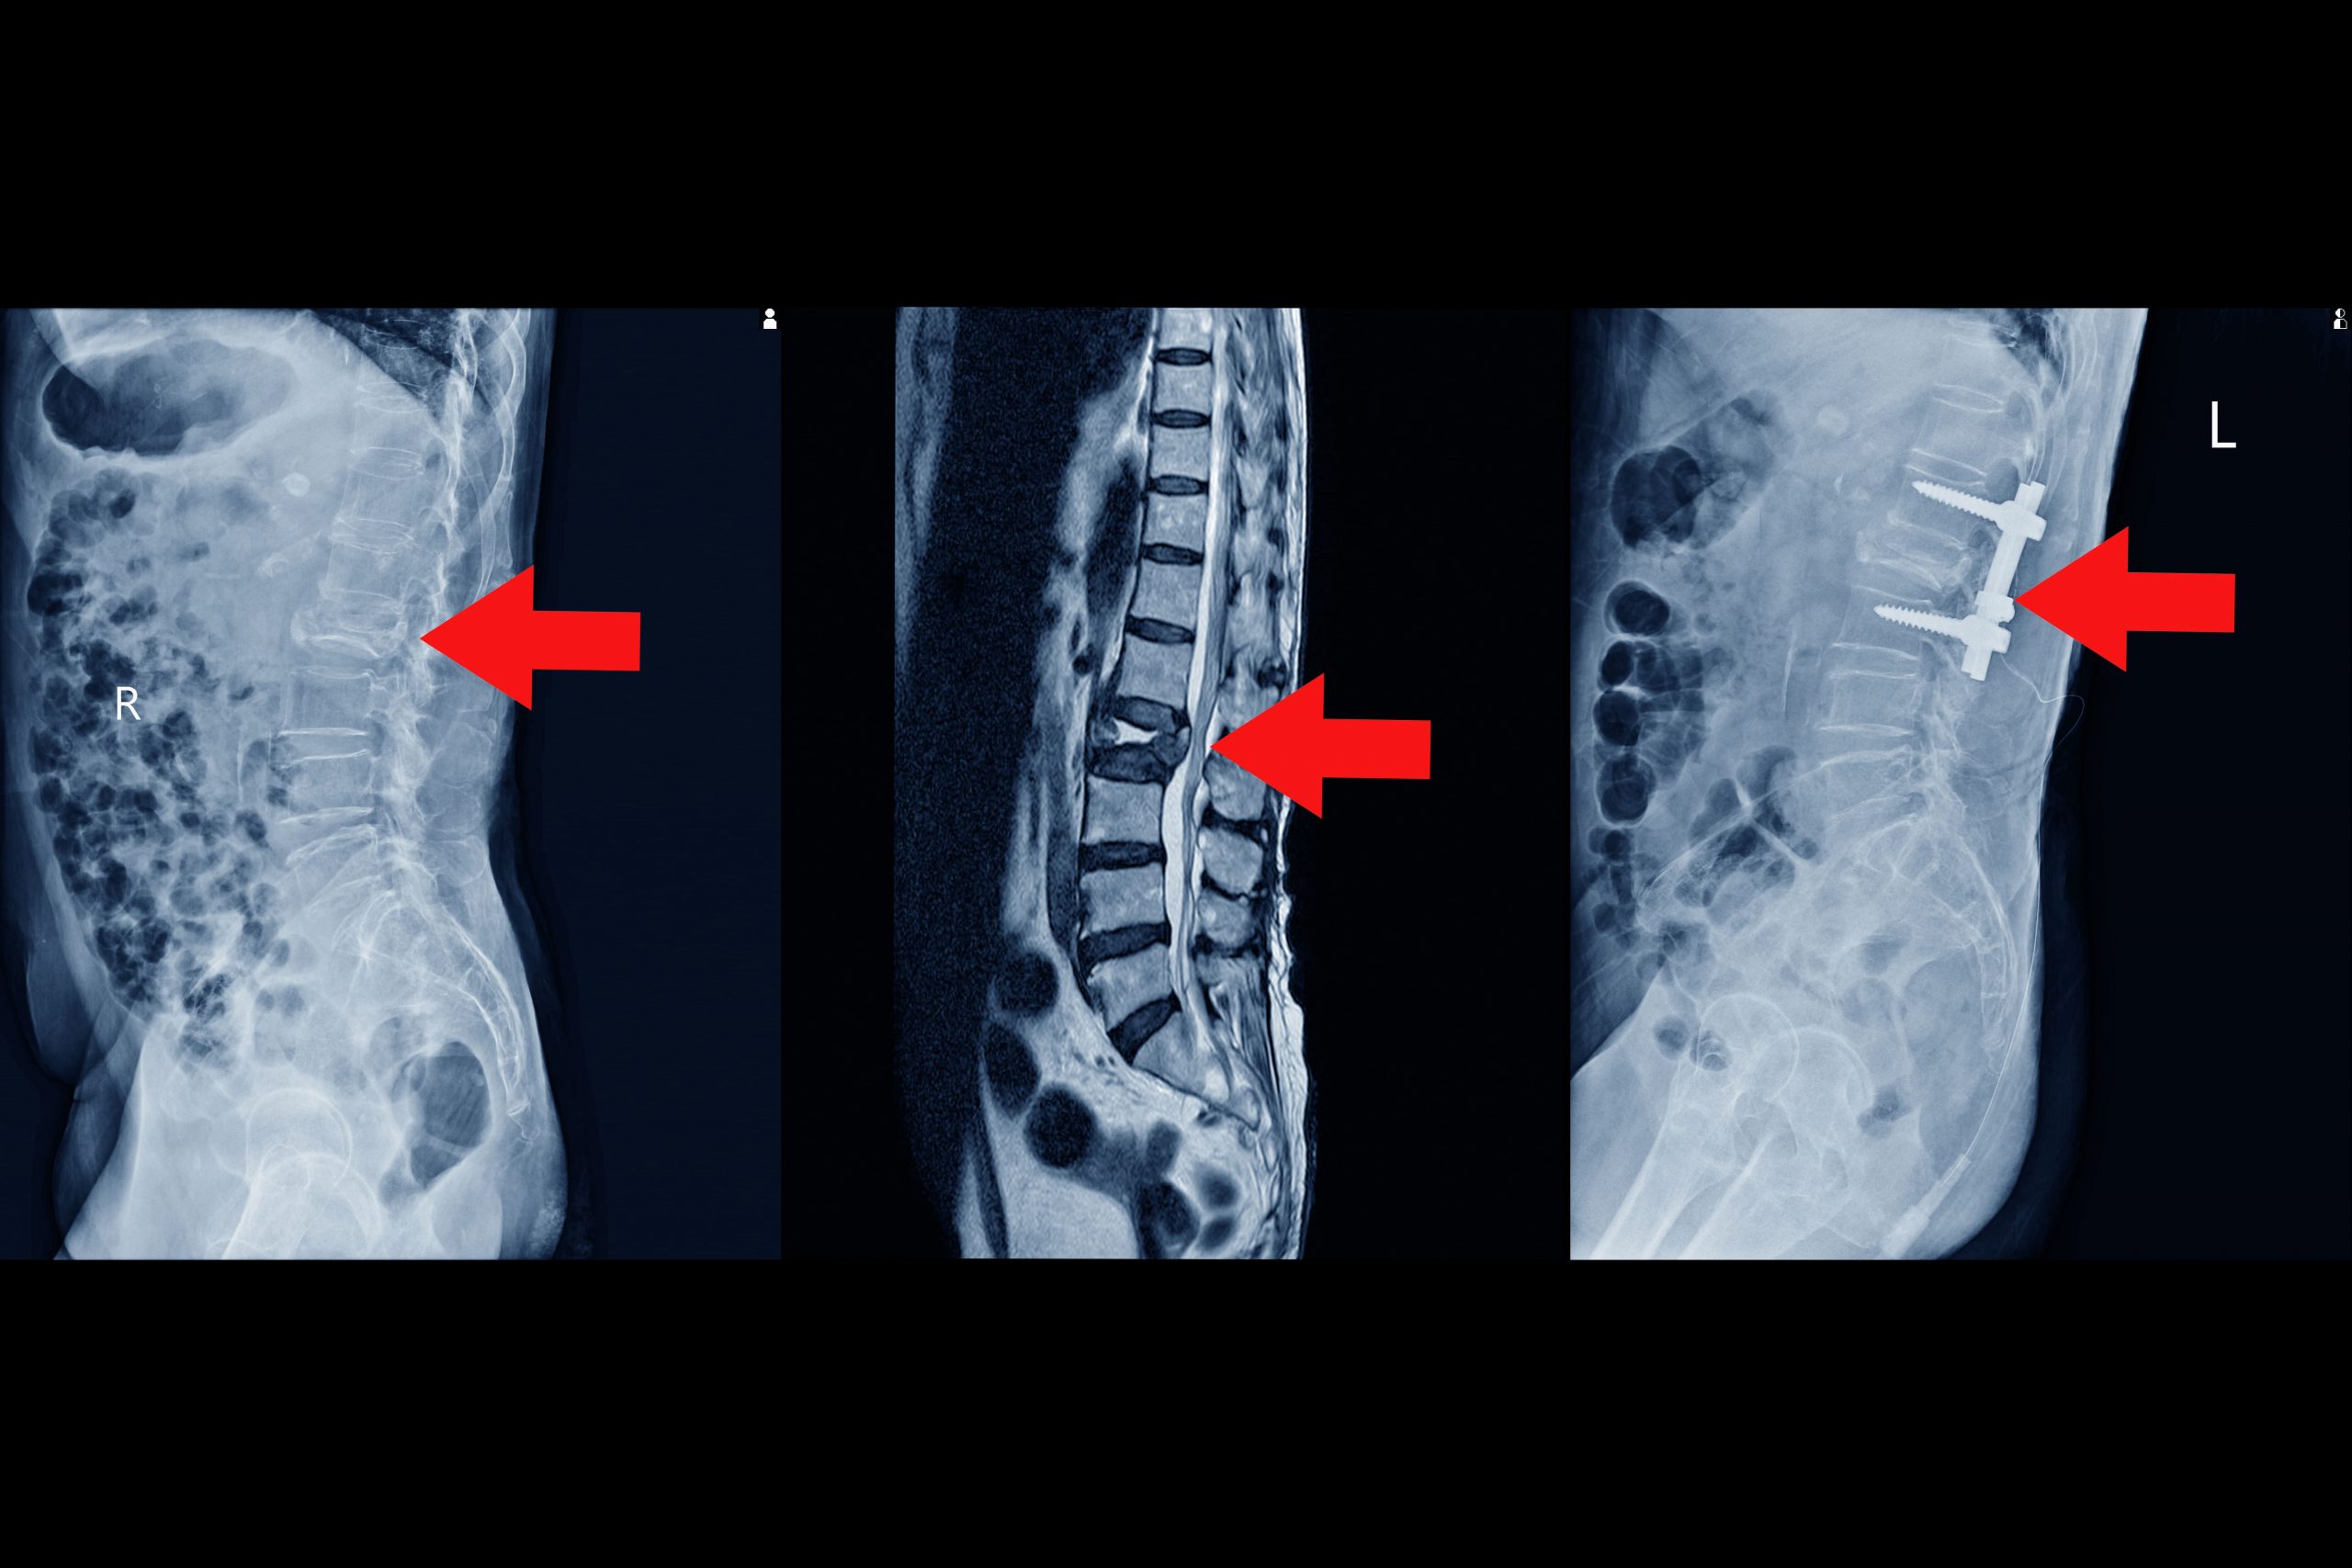 mri lumbar spine history fall with back pain radiate leg rule out spinal stenosis impression burst fracture l2 vertebral body with severe vertebral collapse red point medical concept 1 scaled